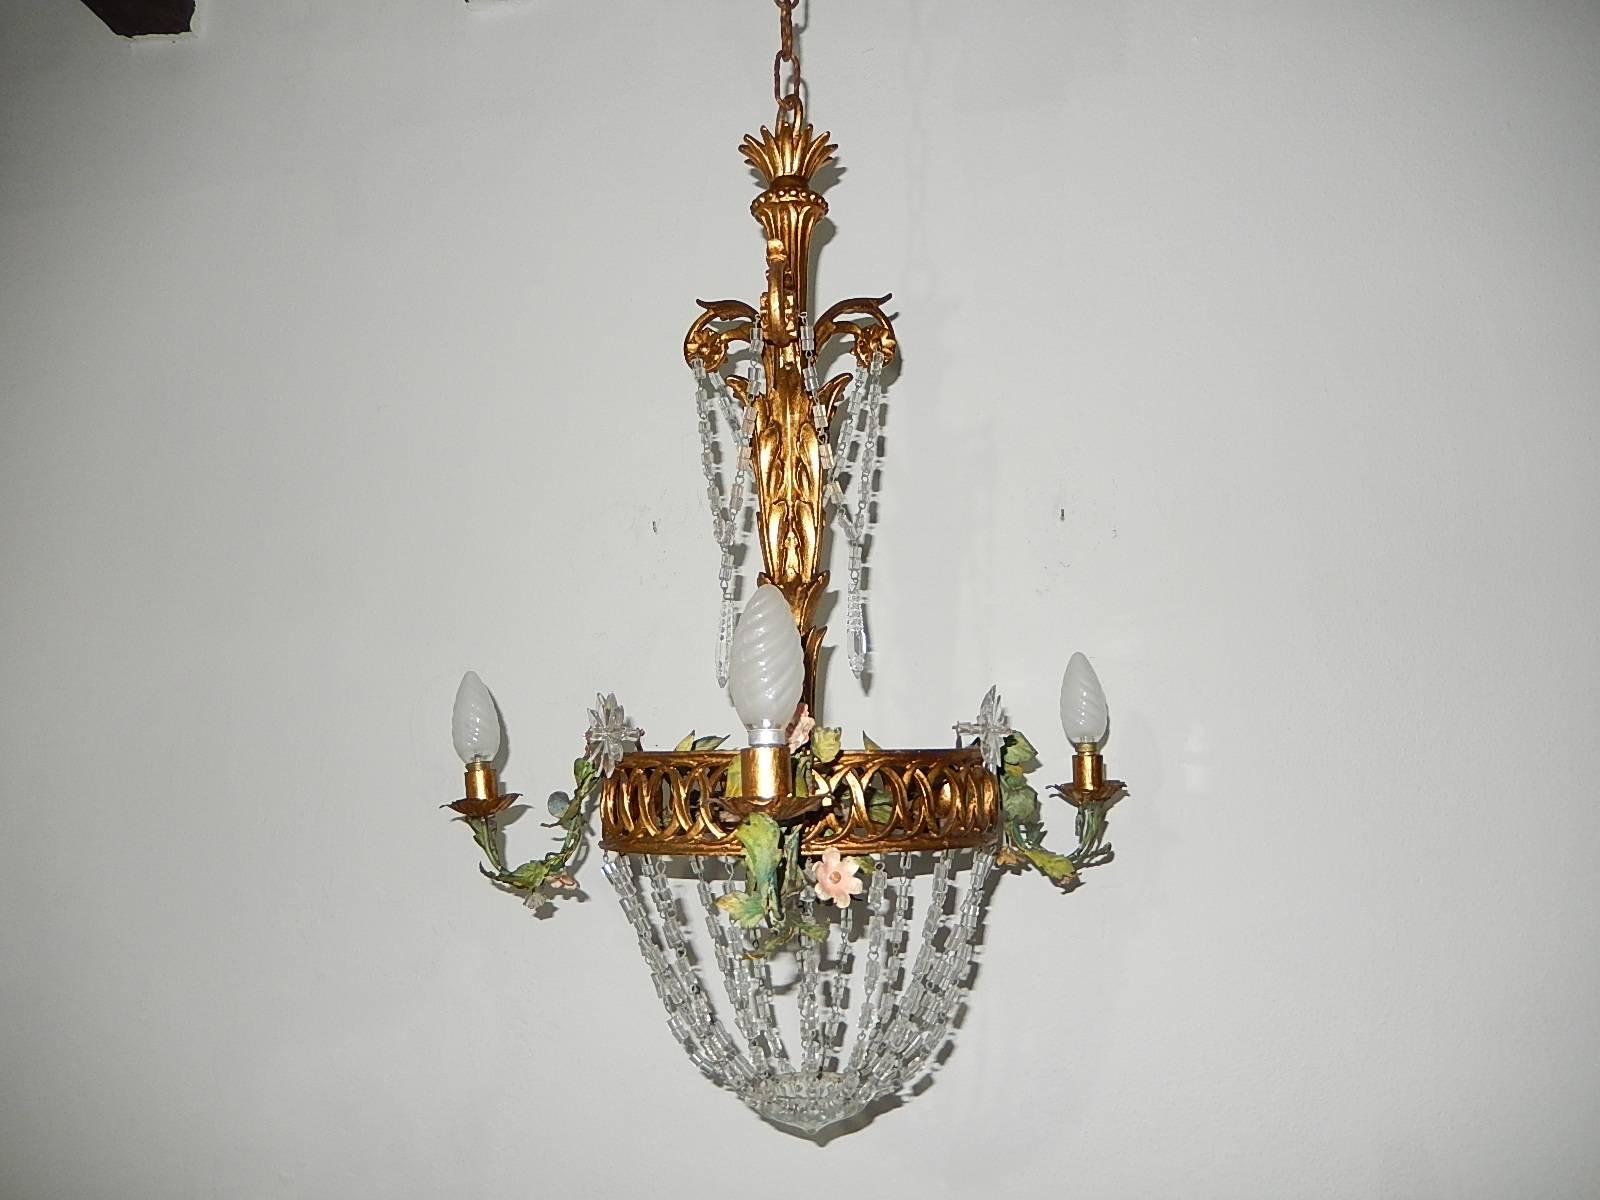 Housing four lights, three on sides, one on bottom. Rewired and ready to hang. Hand-carved giltwood with intricate details. Tole arms (detachable) floral bulb holder arms, wood center. All original paint. Adorning crystal swags encircling this